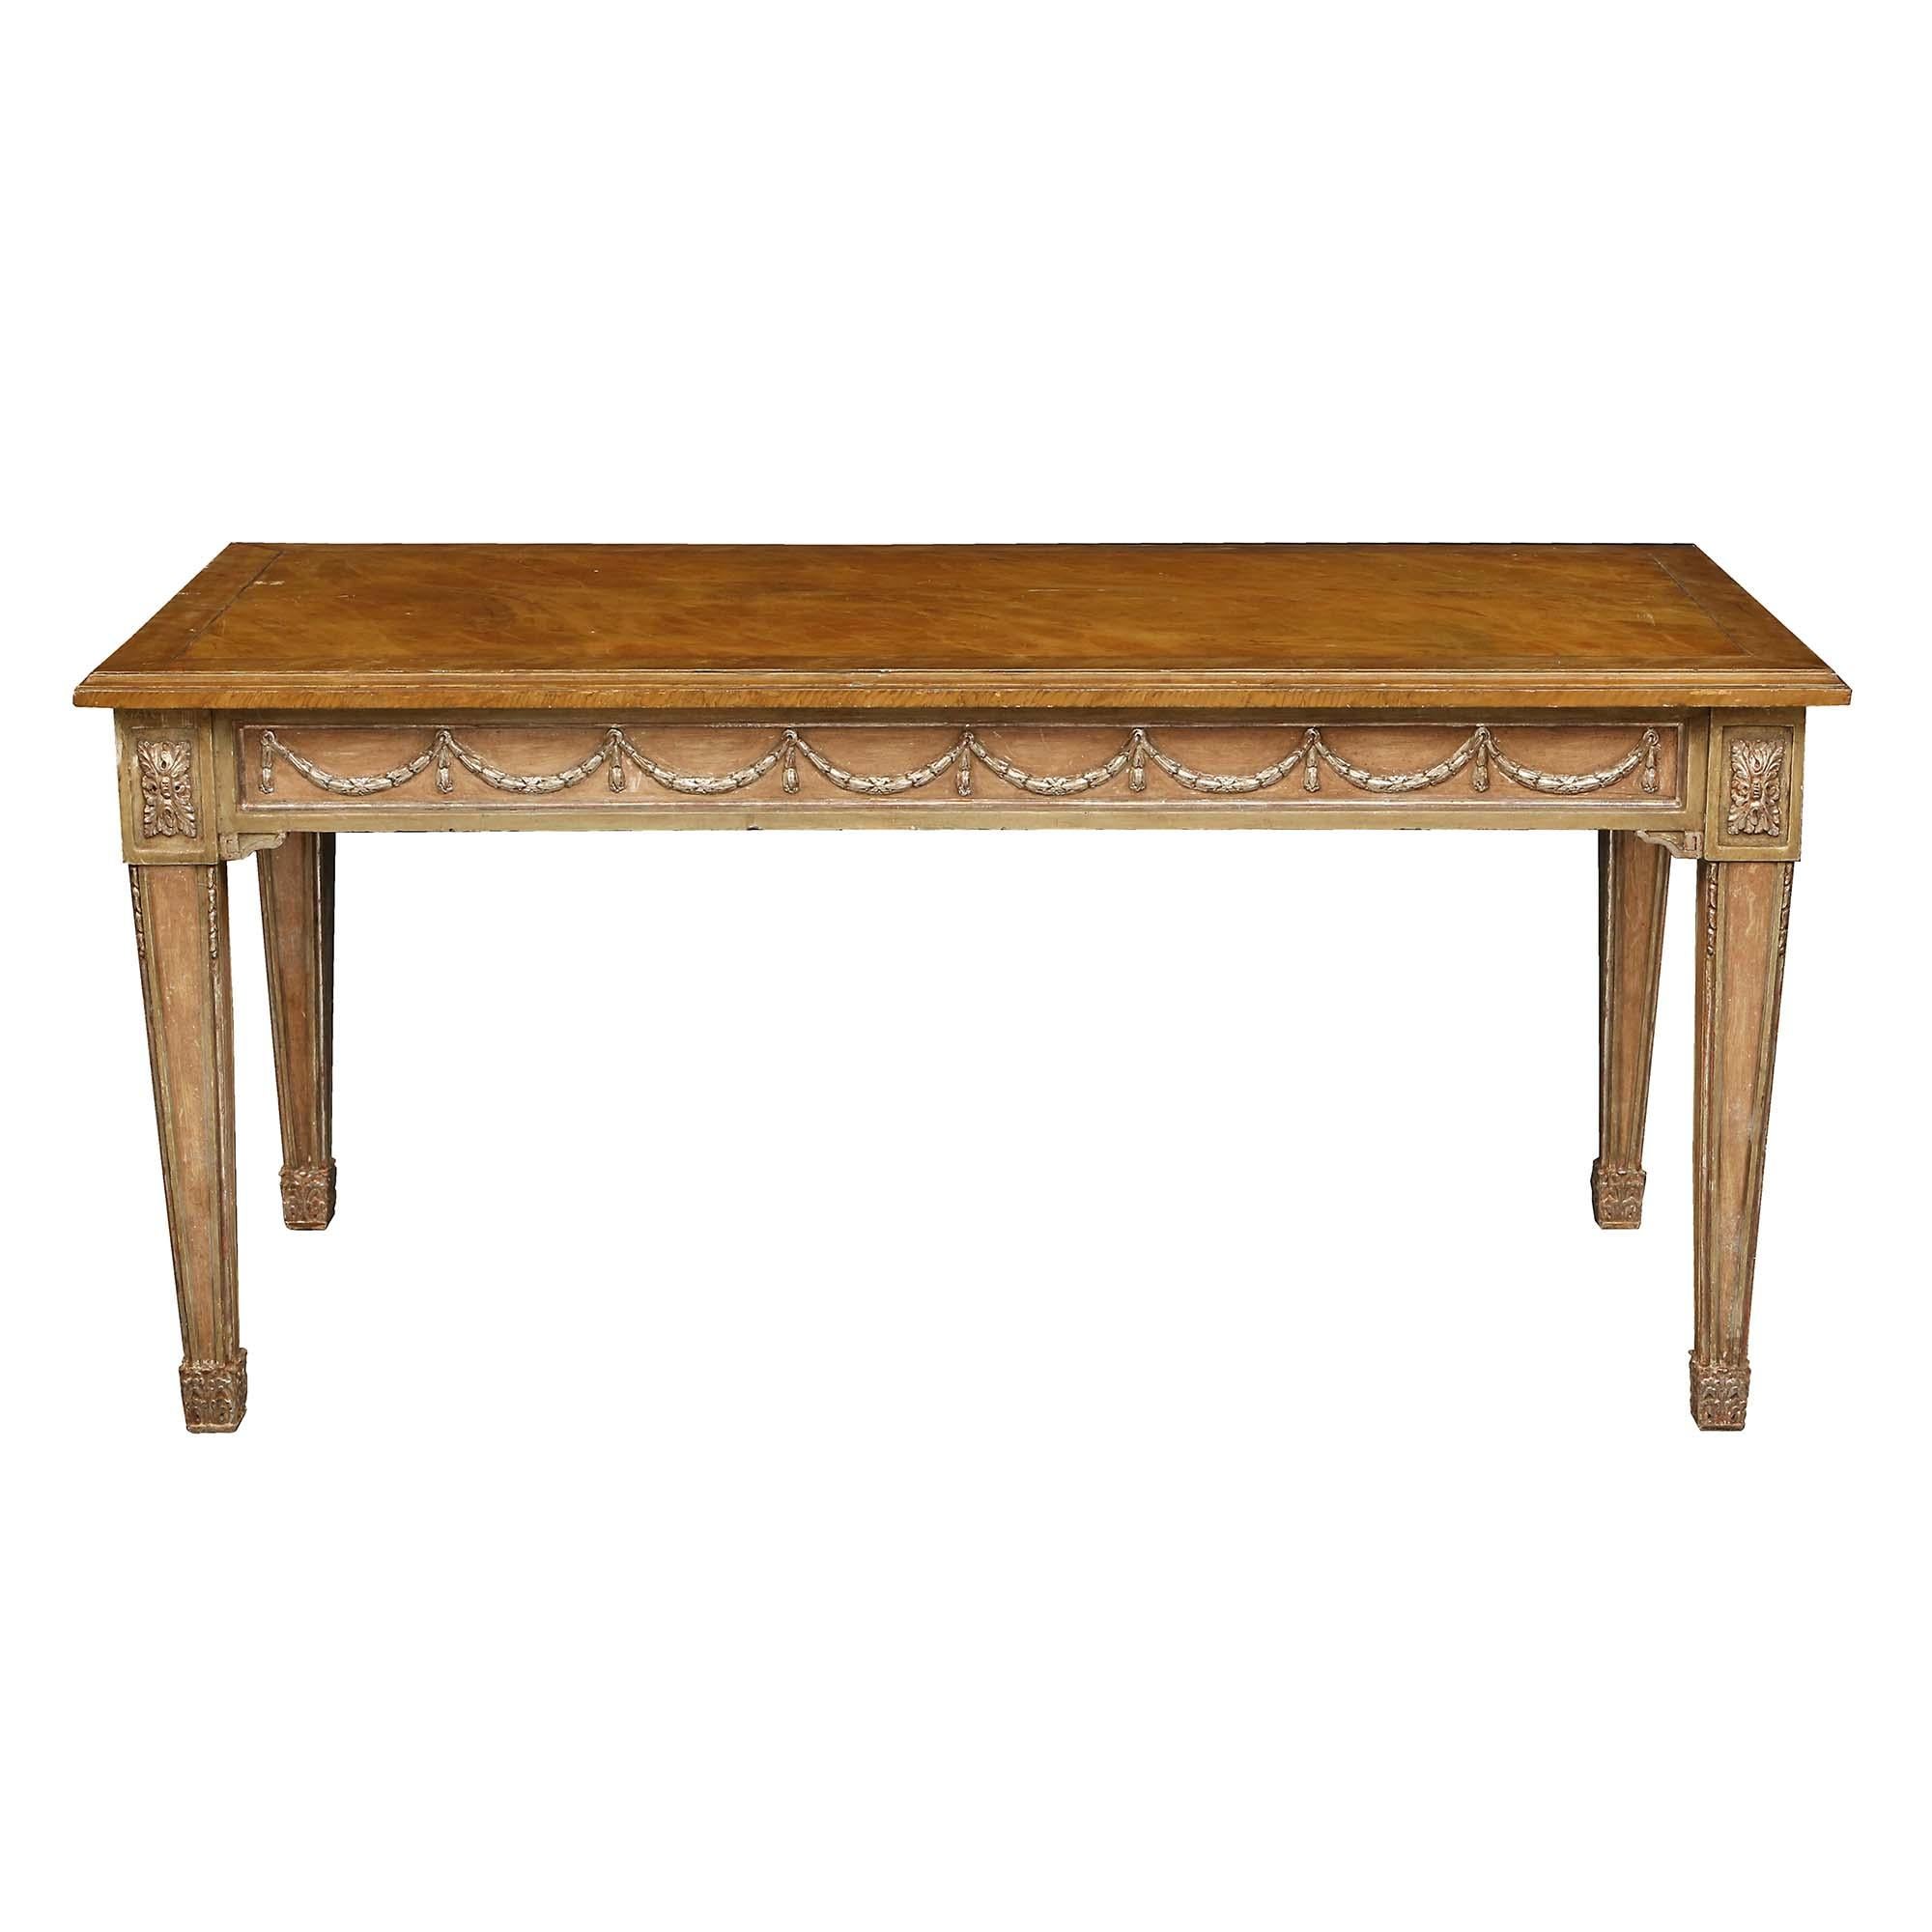 An elegant Italian 19th century Louis XVI st. patinated and Mecca center/dining table. The table is raised by handsome square tapered legs with recessed patinated panels framed in Mecca fillets and richly carved block rosettes. At the straight